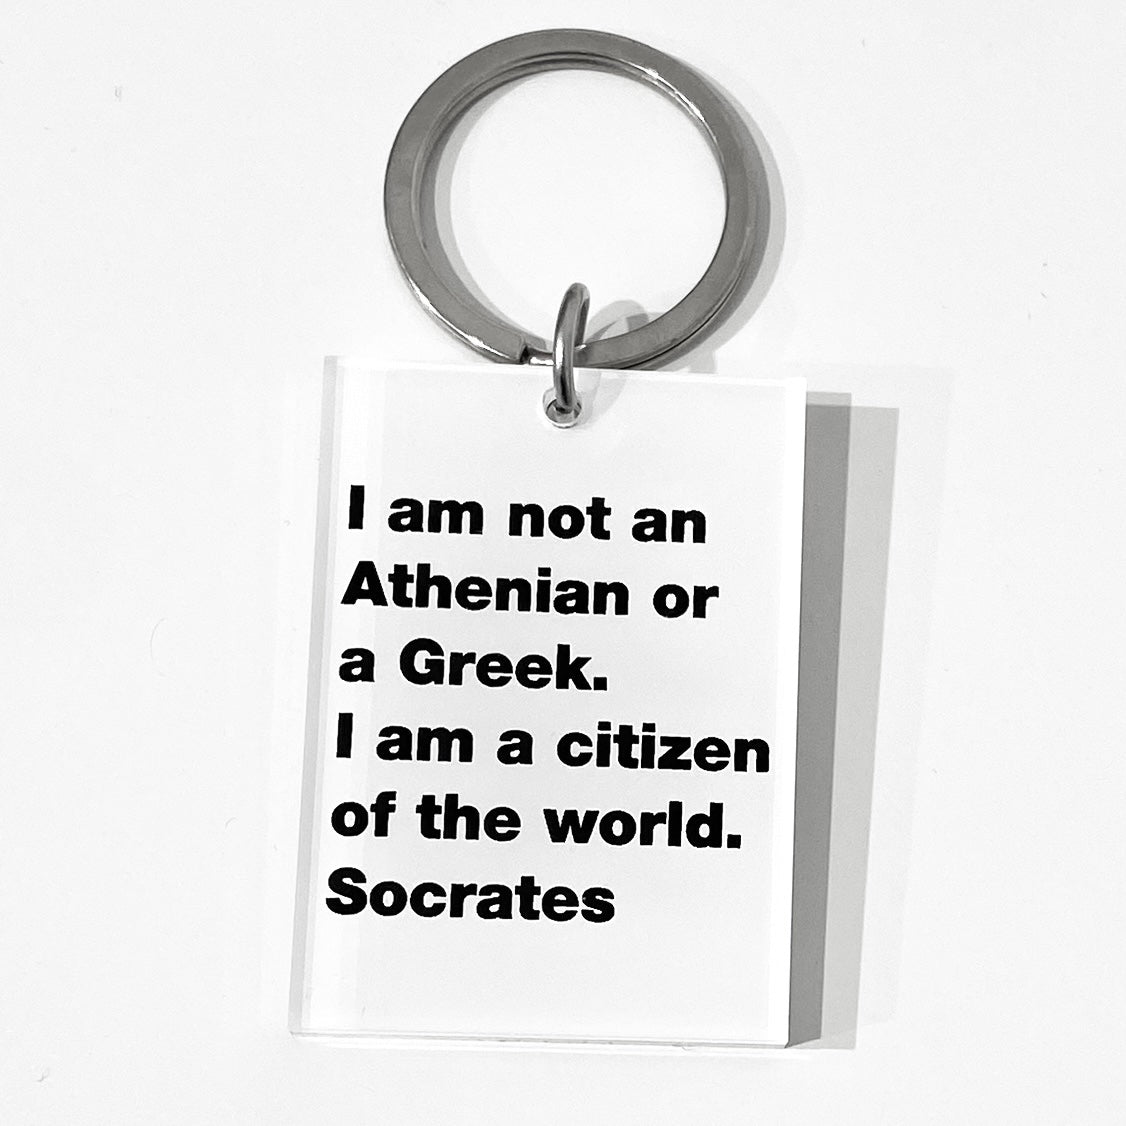 Citizen of the world. -Socrates key ring